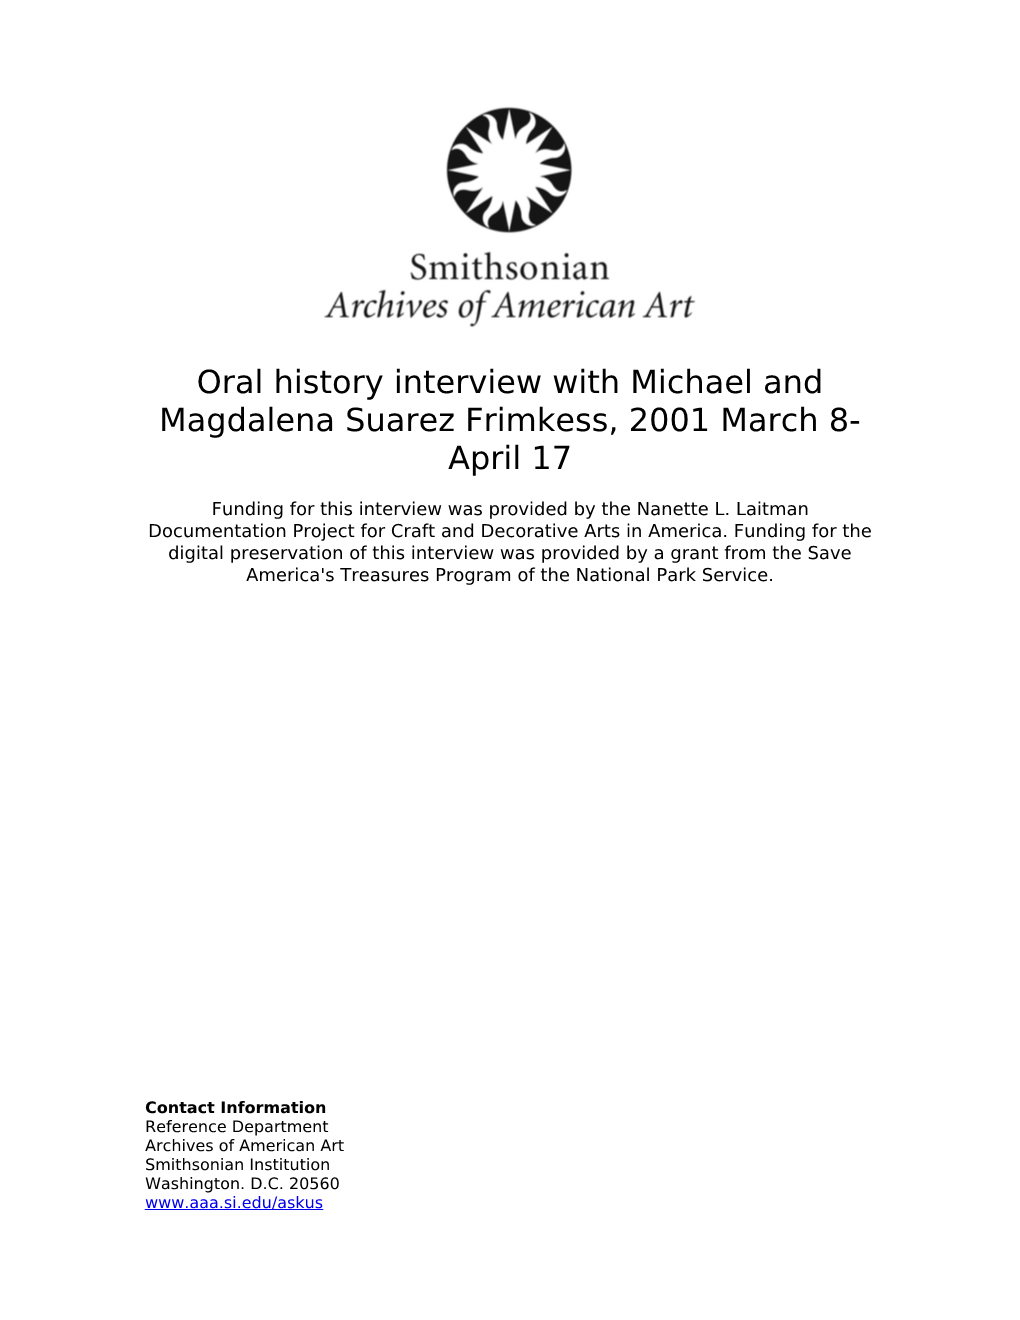 Oral History Interview with Michael and Magdalena Suarez Frimkess, 2001 March 8- April 17